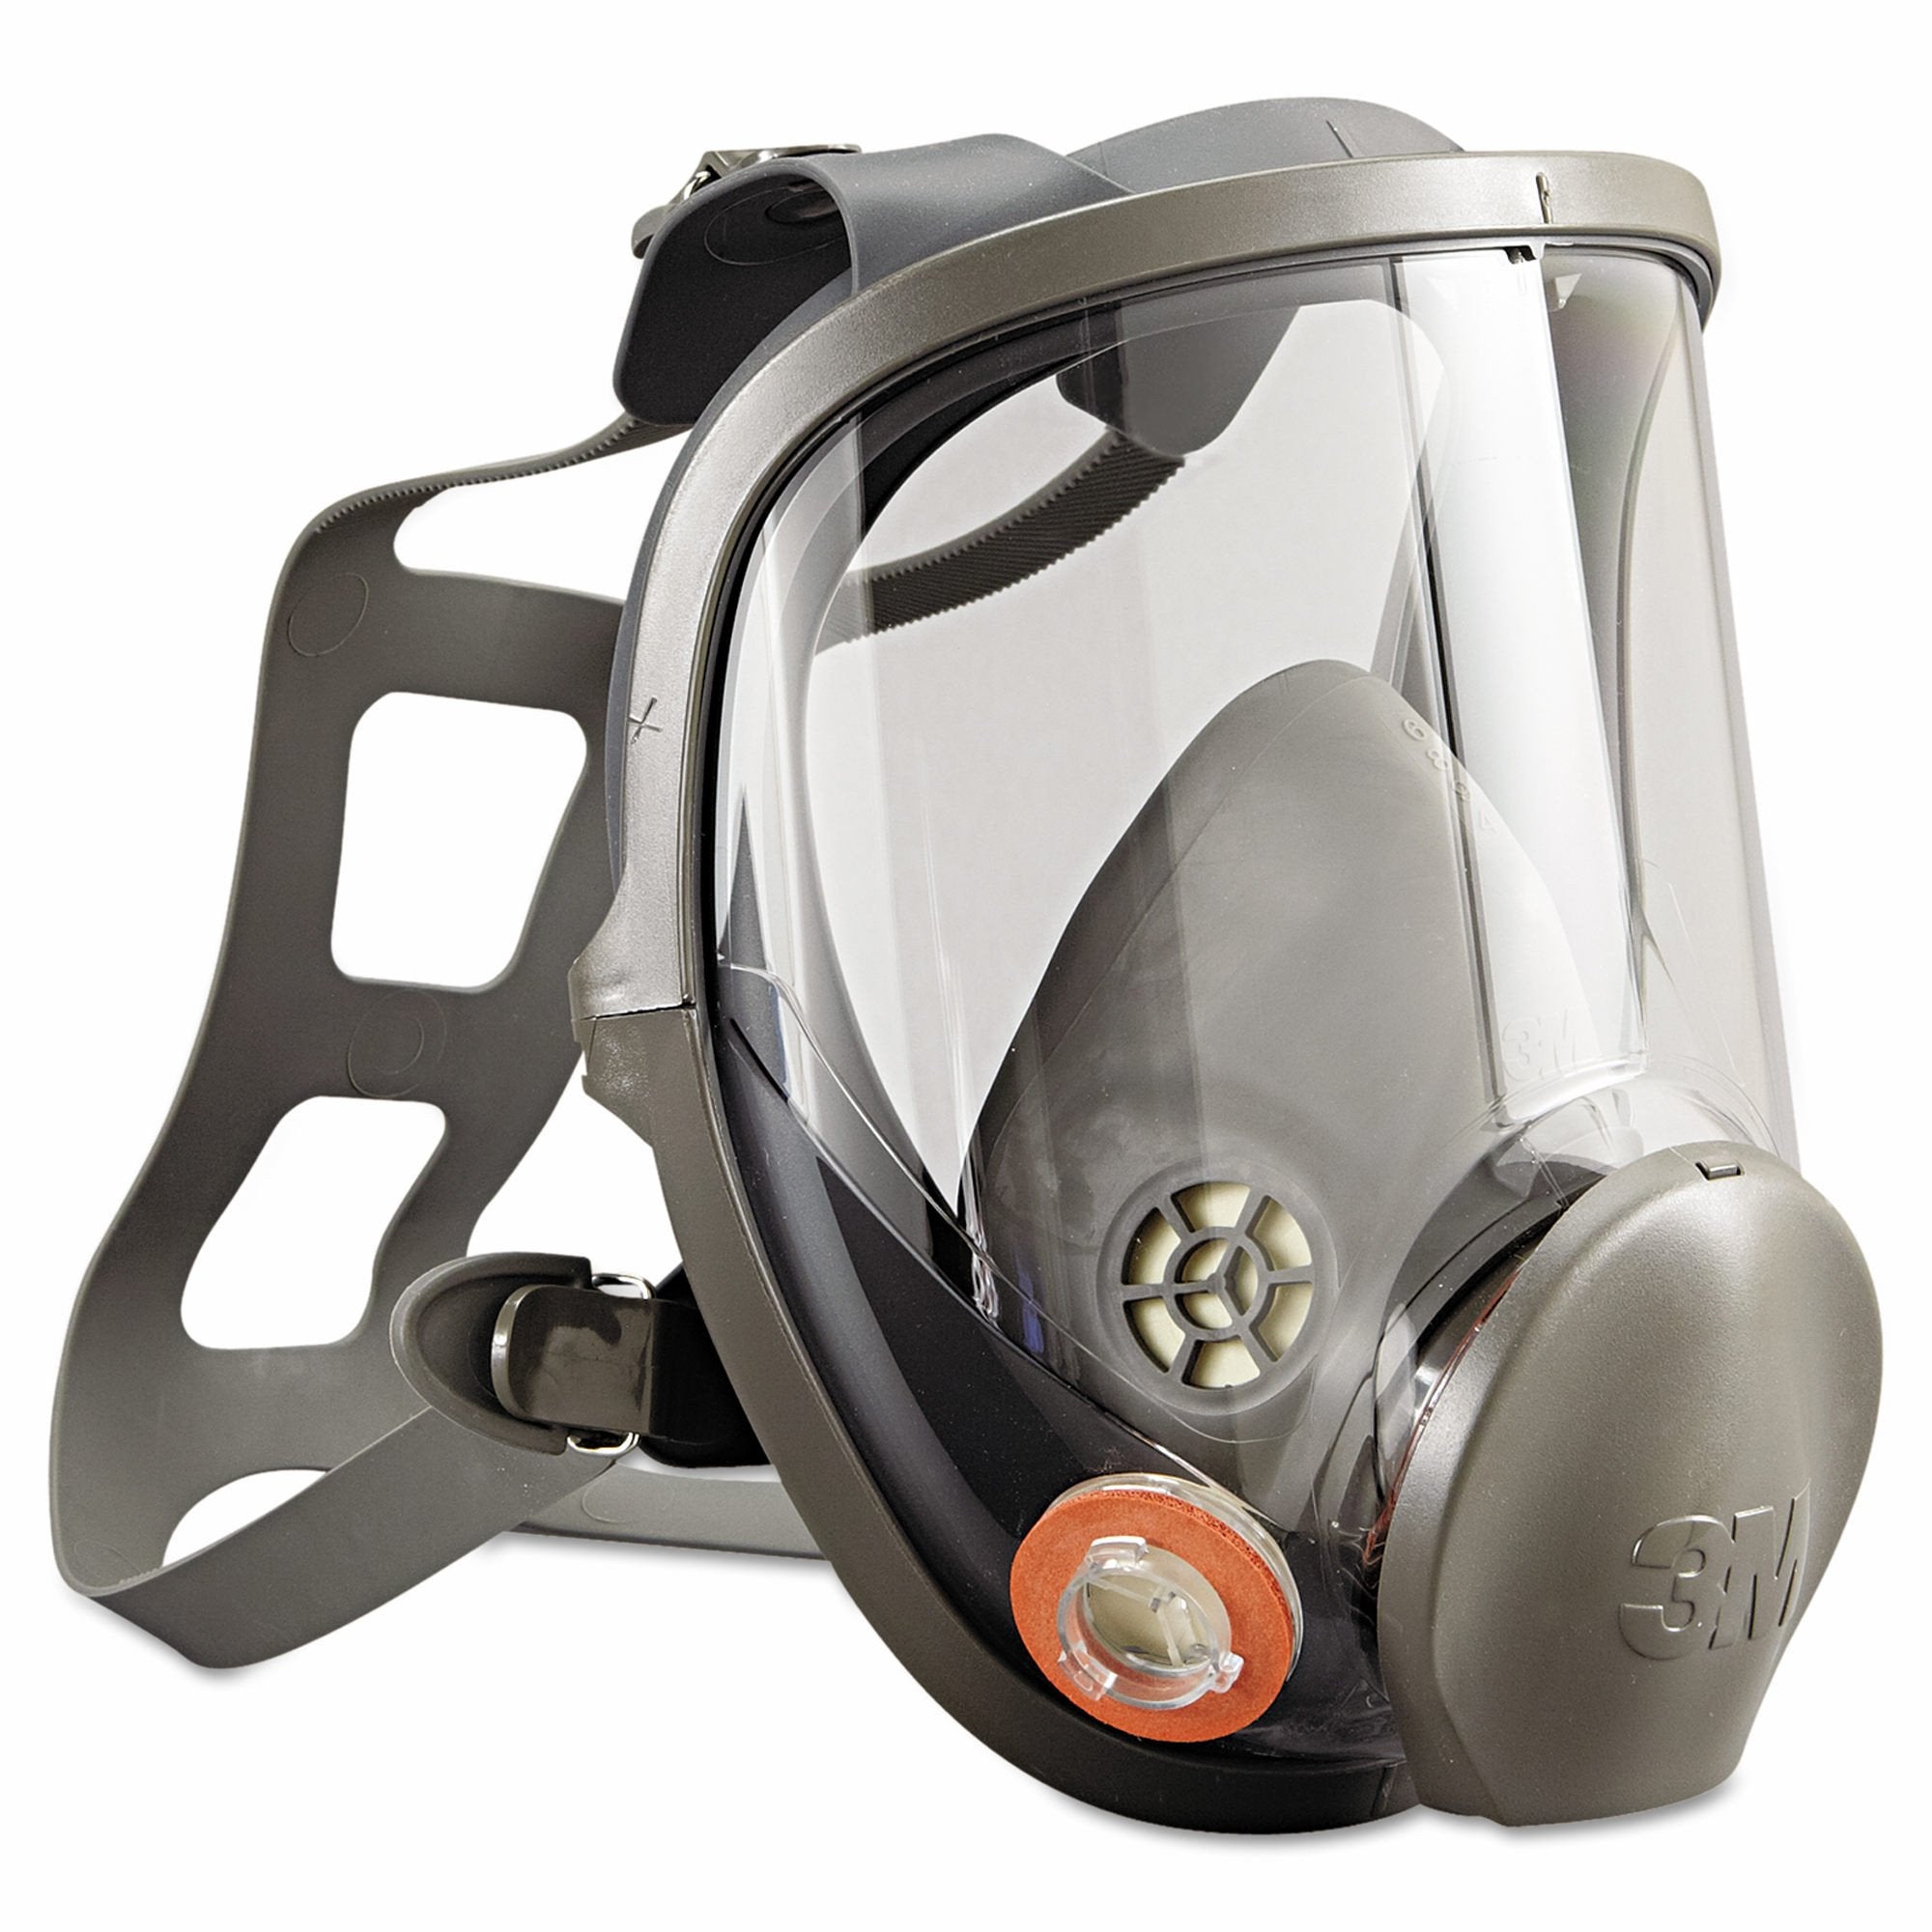 3M 6000 Series Full Face Respirator Face Mask | Small, Medium or Large Personal Protective Equipment - Cleanflow